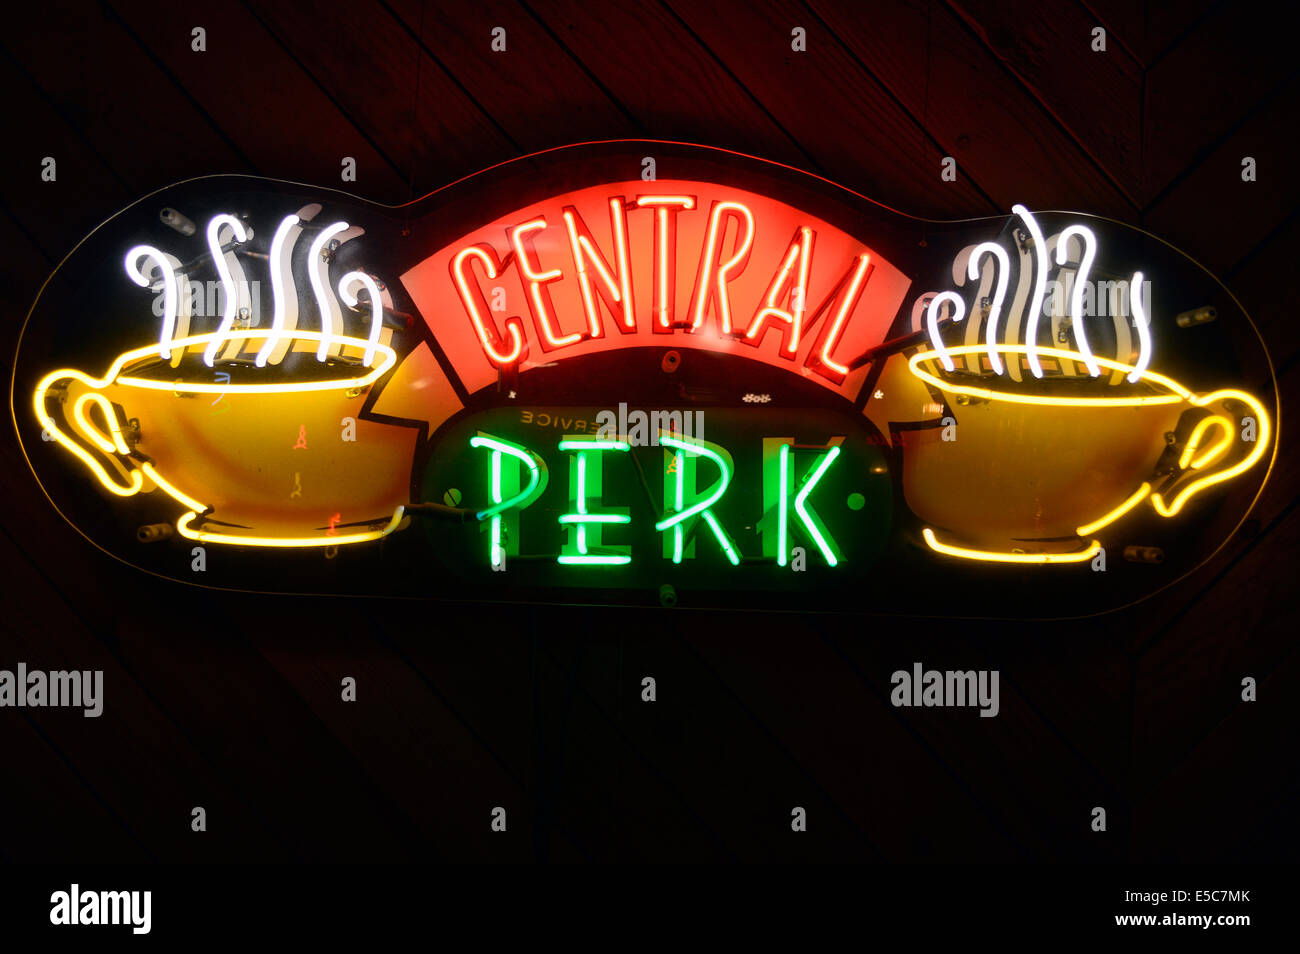 The neon sign of the 'Central Perk' coffee shop used in the tv series Friends, at the Warner Bros Studio in Burbank, Los Angele Stock Photo